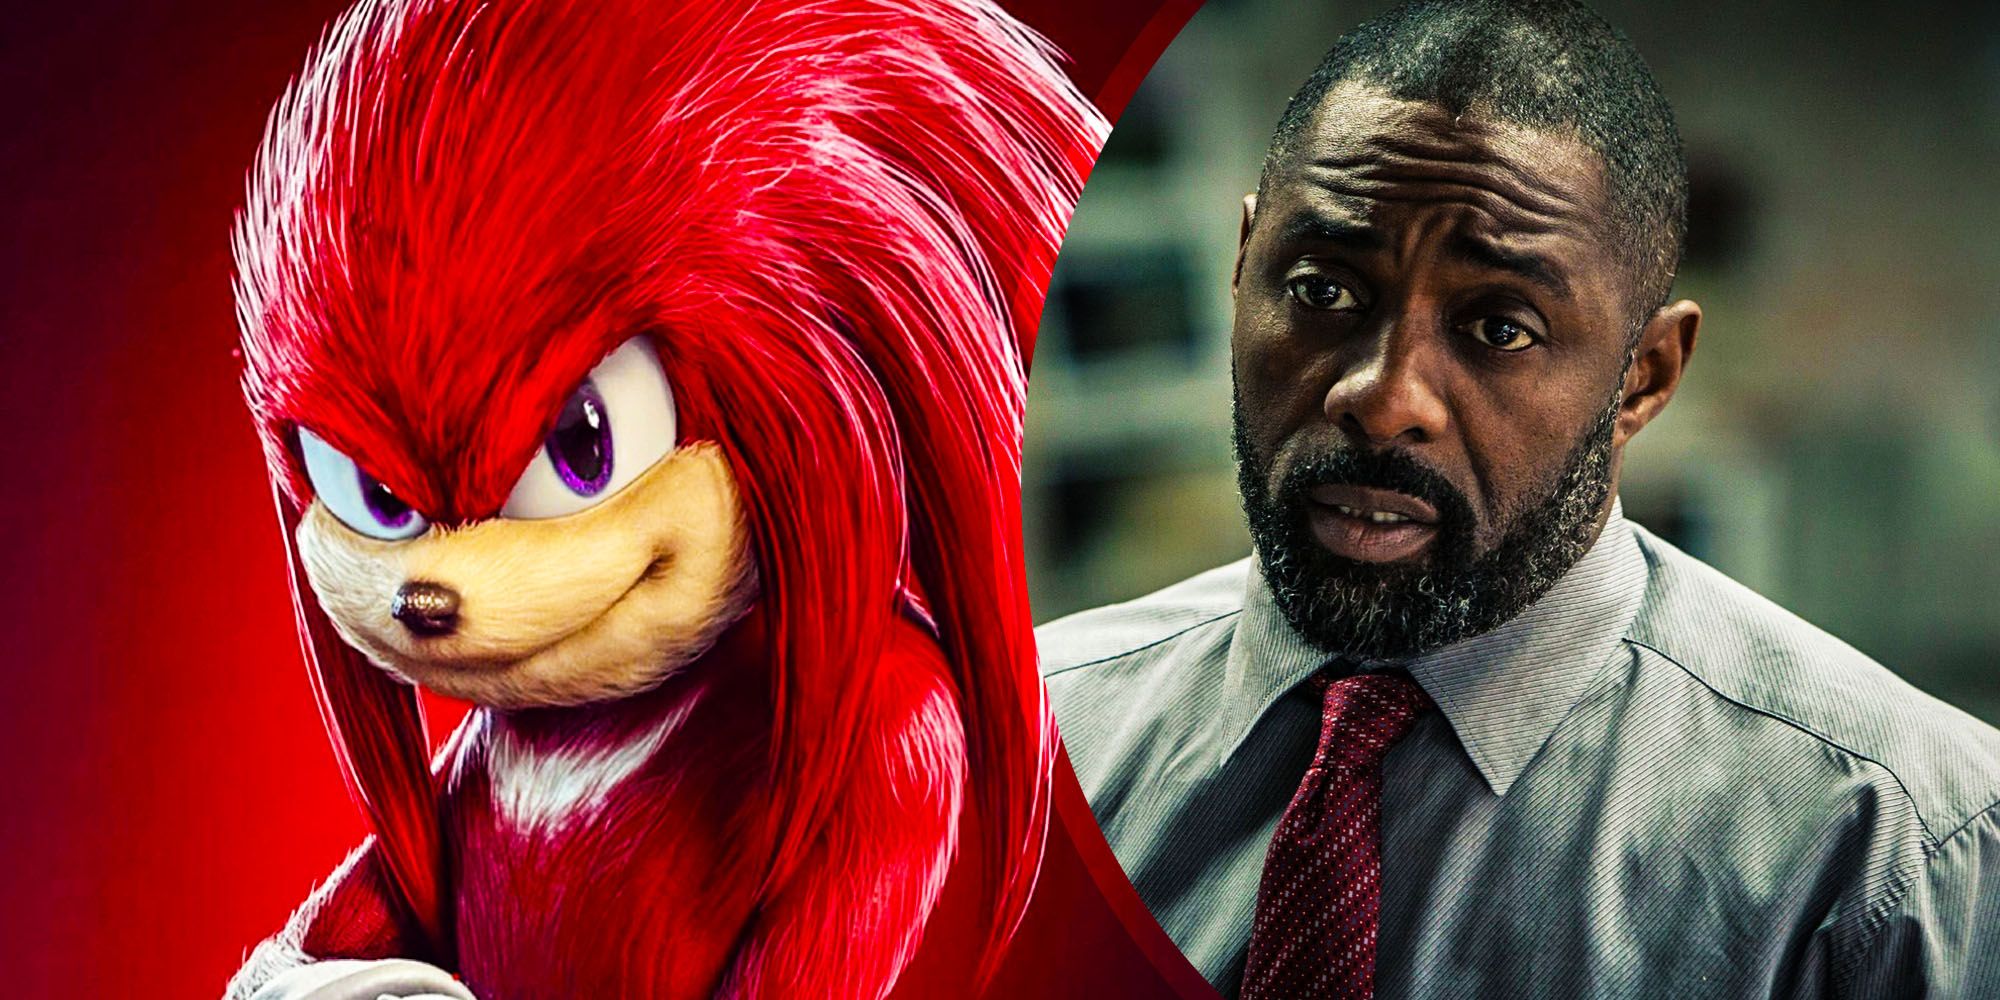 Why Idris Elba Is Perfect Casting For Knuckles In Sonic The Hedgehog 2